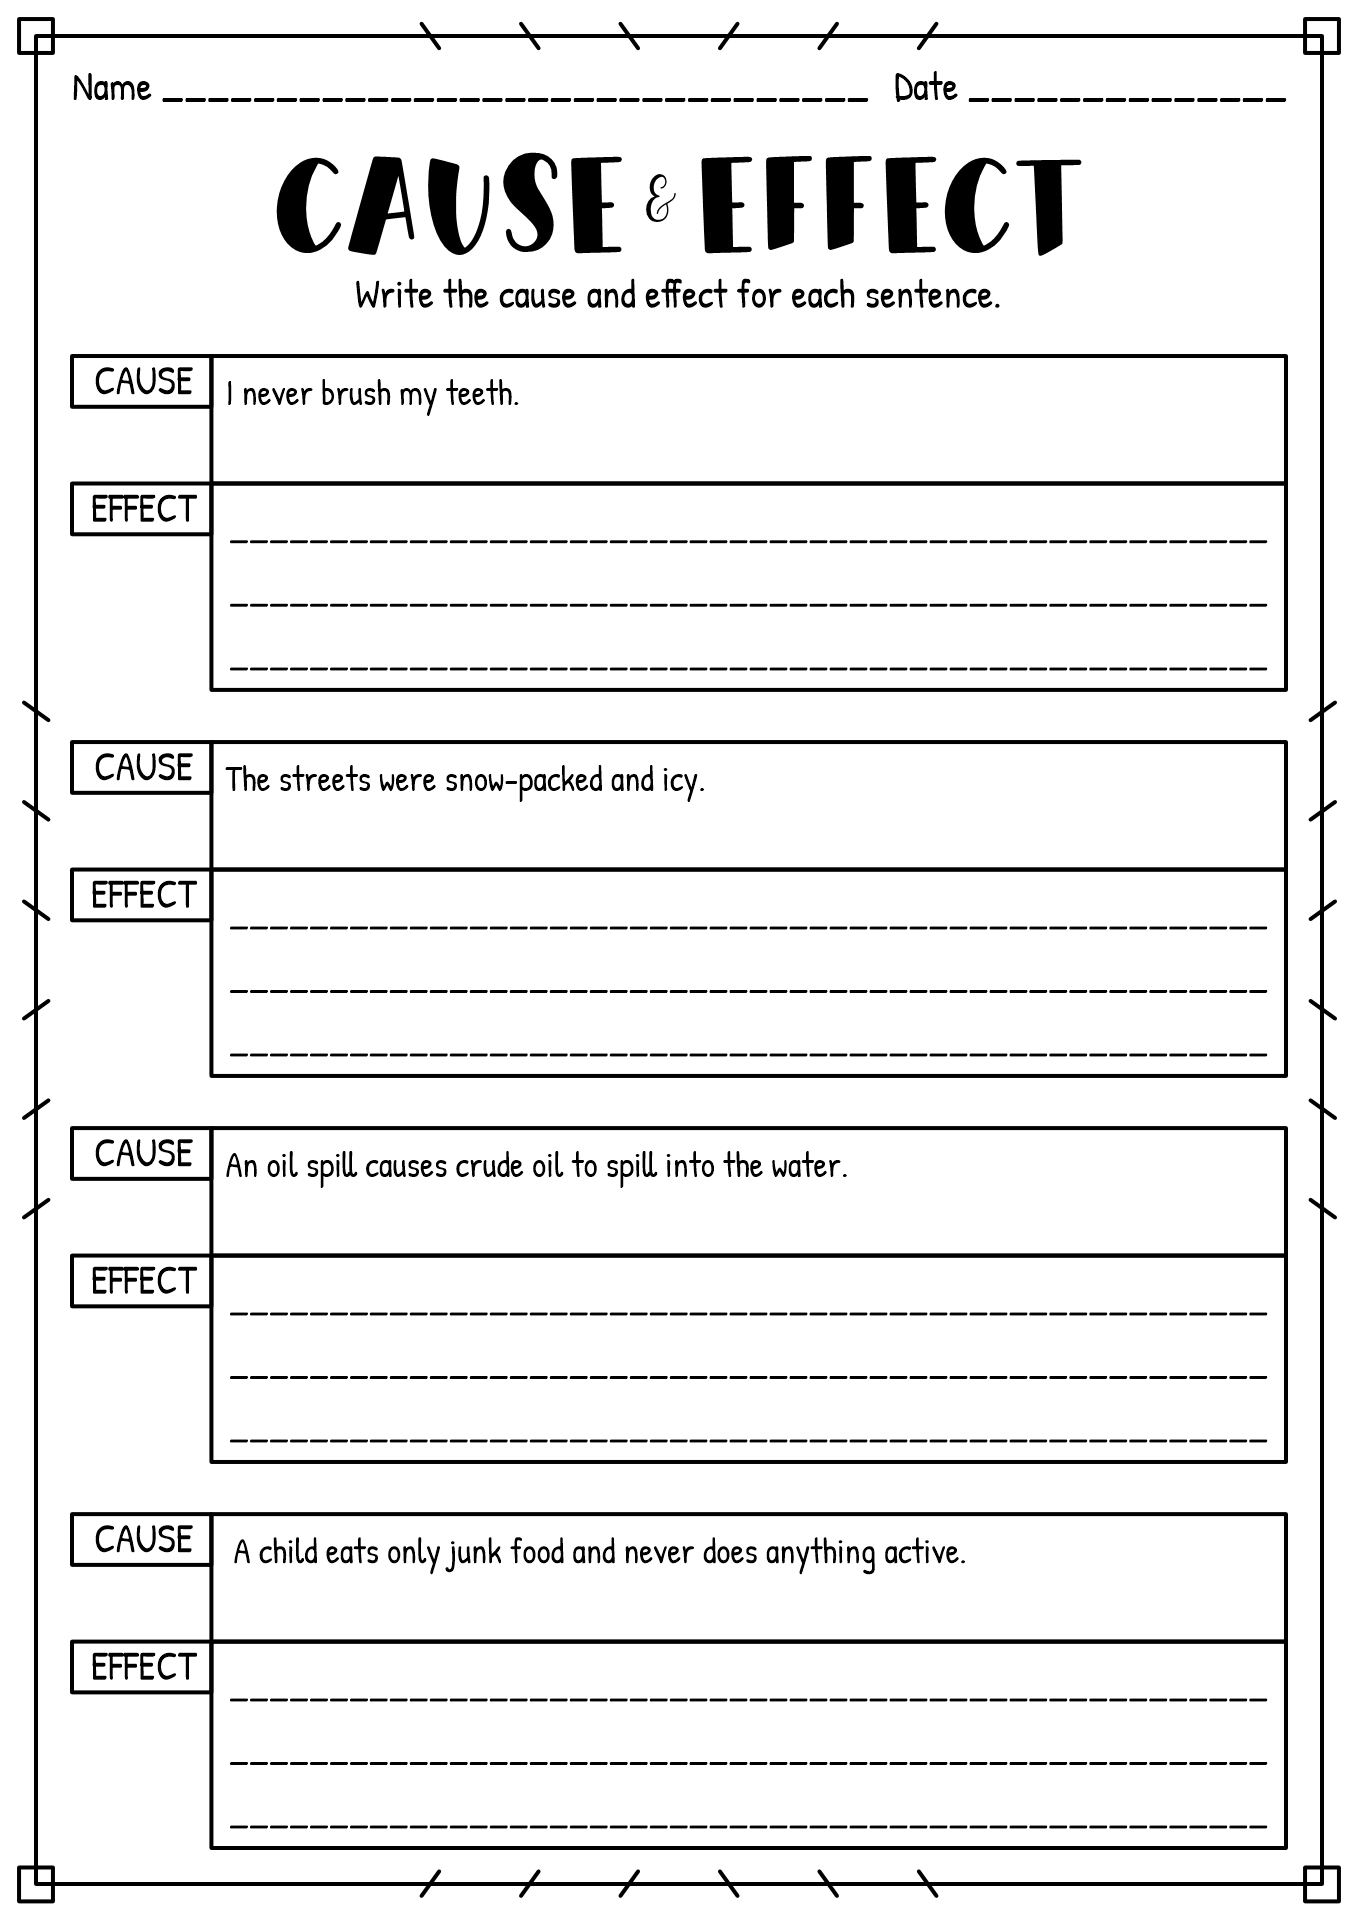 17-best-images-of-matching-worksheet-template-pdf-vocabulary-matching-worksheet-template